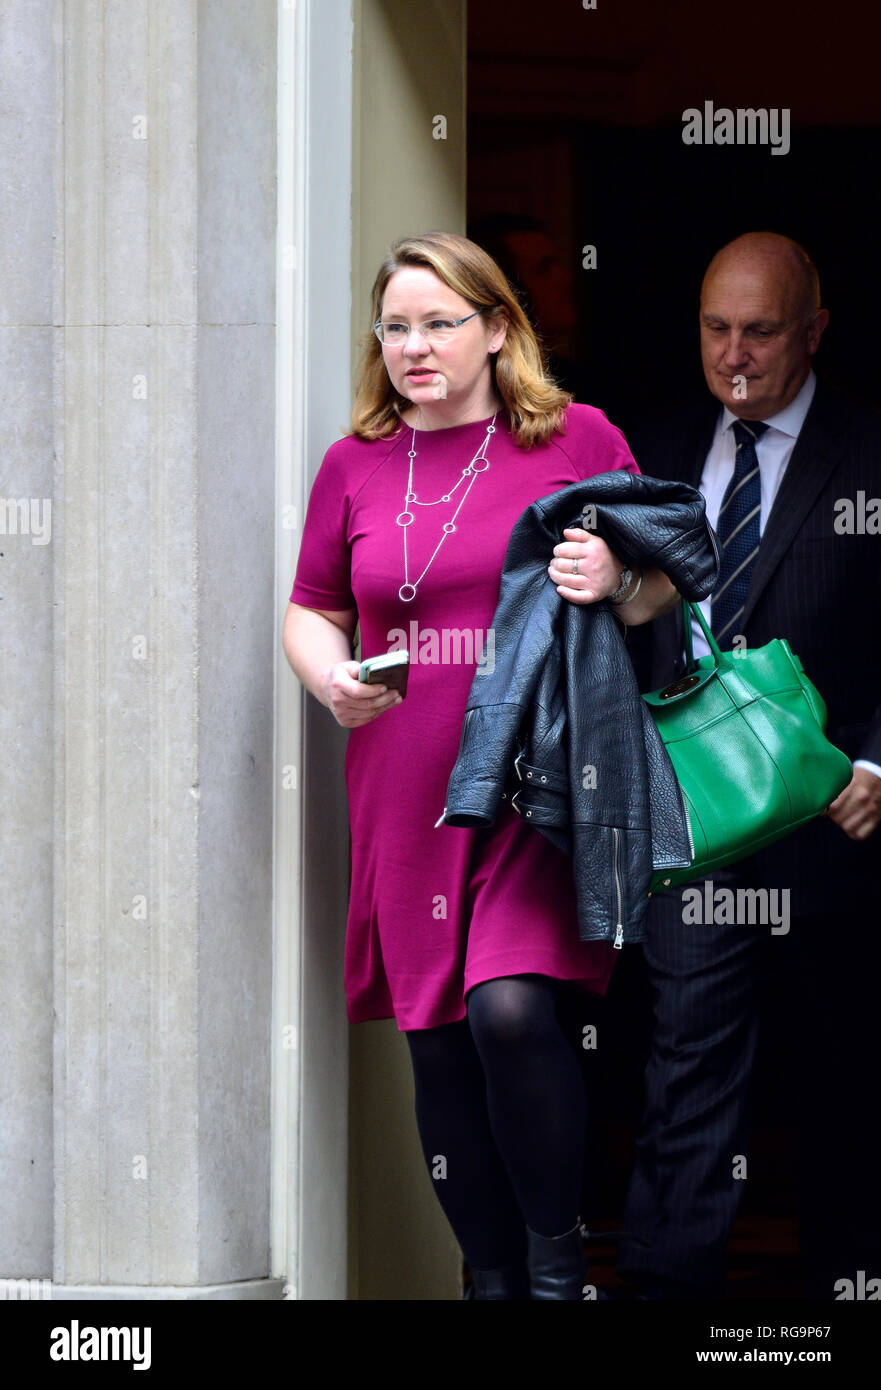 Cate Sleep (Head of Public Affairs, EEF) and Stephen Phipson CBE (Chief Executive of EEF - the Manufacturers Organisation)  leaving 10 Downing Street, Stock Photo